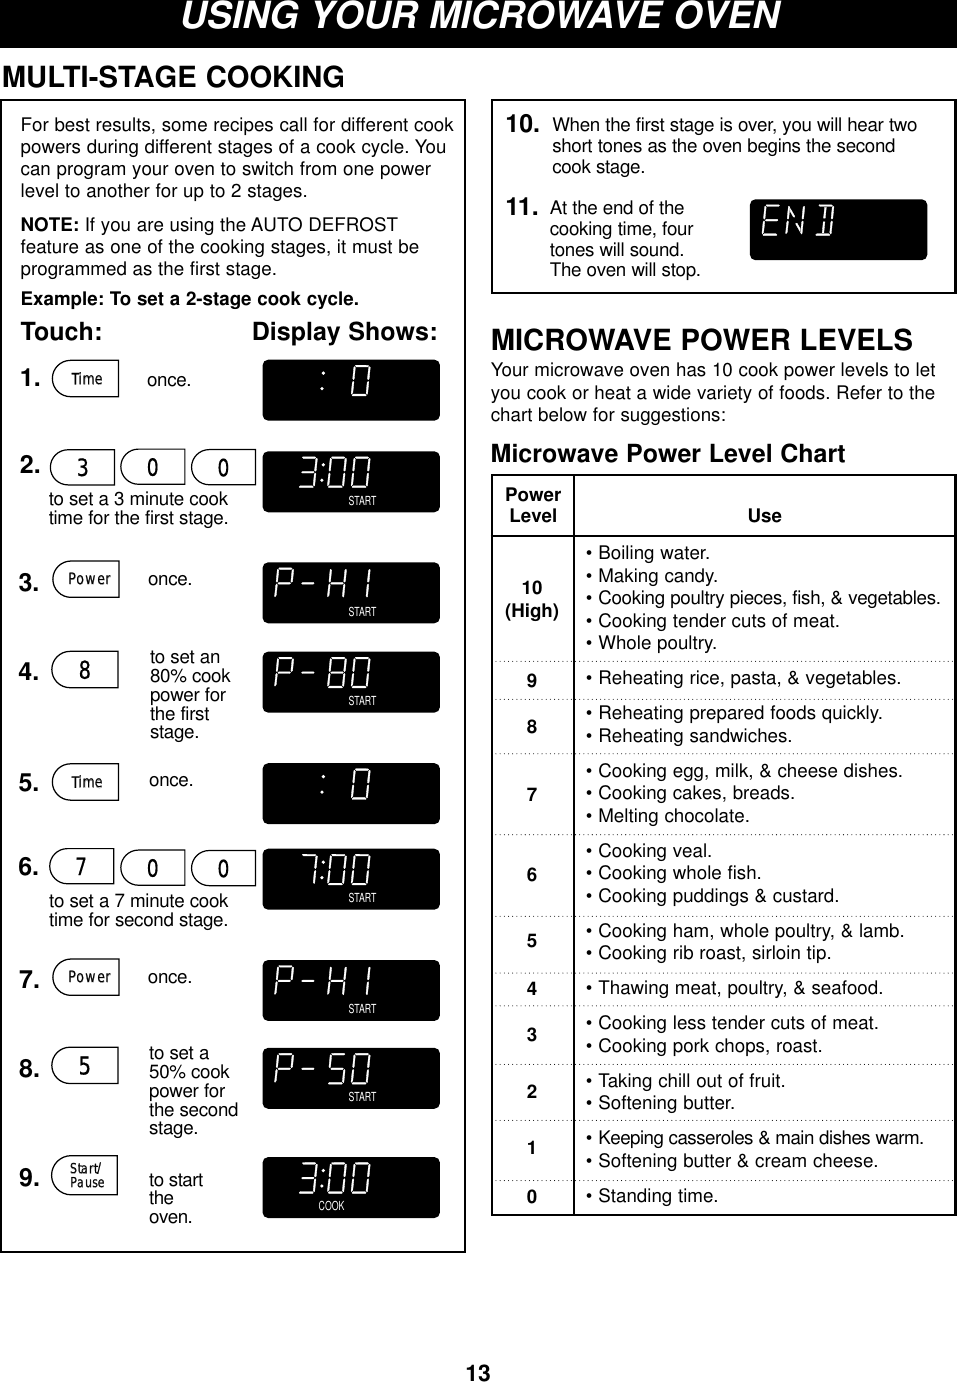 13USING YOUR MICROWAVE OVENMICROWAVE POWER LEVELSYour microwave oven has 10 cook power levels to letyou cook or heat a wide variety of foods. Refer to thechart below for suggestions:Microwave Power Level Chart•Boiling water.•Making candy.•Cooking poultry pieces, fish, &amp; vegetables.•Cooking tender cuts of meat.•Whole poultry.•Reheating rice, pasta, &amp; vegetables.•Reheating prepared foods quickly.•Reheating sandwiches.•Cooking egg, milk, &amp; cheese dishes.•Cooking cakes, breads.•Melting chocolate.•Cooking veal.•Cooking whole fish.•Cooking puddings &amp; custard.•Cooking ham, whole poultry, &amp; lamb.•Cooking rib roast, sirloin tip.•Thawing meat, poultry, &amp; seafood.•Cooking less tender cuts of meat.•Cooking pork chops, roast.•Taking chill out of fruit.•Softening butter.•Keeping casseroles &amp; main dishes warm.•Softening butter &amp; cream cheese.•Standing time.10(High)9876543210UsePowerLevelFor best results, some recipes call for different cookpowers during different stages of a cook cycle. Youcan program your oven to switch from one powerlevel to another for up to 2 stages.NOTE: If you are using the AUTO DEFROSTfeature as one of the cooking stages, it must be programmed as the first stage.Example: To set a 2-stage cook cycle.Touch: Display Shows:MULTI-STAGE COOKING1.2.5. once.once.3. once.4. to set an80% cookpower forthe firststage.to set a 3 minute cook time for the first stage.6.to set a 7 minute cook time for second stage.7. once.8. to set a50% cookpower forthe second stage.9.At the end of the cooking time, fourtones will sound.The oven will stop.to startthe oven.11.When the first stage is over, you will hear twoshort tones as the oven begins the secondcook stage.10.StarStart/PausePausePowerPowerPowerPower5TimeimeTimeimeCOOKDEFROST START AUTOLbsOZCUPKgSLICEPCSCOOKDEFROST AUTOLbsOZCUPKgSLICEPCSSTARTCOOKDEFROST AUTOLbsOZCUPKgSLICEPCSSTARTCOOKDEFROST AUTOLbsOZCUPKgSLICEPCSSTARTCOOKDEFROST AUTOLbsOZCUPKgSLICEPCSSTARTCOOKDEFROST AUTOLbsOZCUPKgSLICEPCSSTARTCOOKDEFROST AUTOLbsOZCUPKgSLICEPCSSTARTSTARTDEFROST AUTOLbsOZCUPKgSLICEPCSCOOK8300700DEFROST COOK START AUTOLbsOZCUPKgSLICEPCSDEFROST COOK START AUTOLbsOZCUPKgSLICEPCS